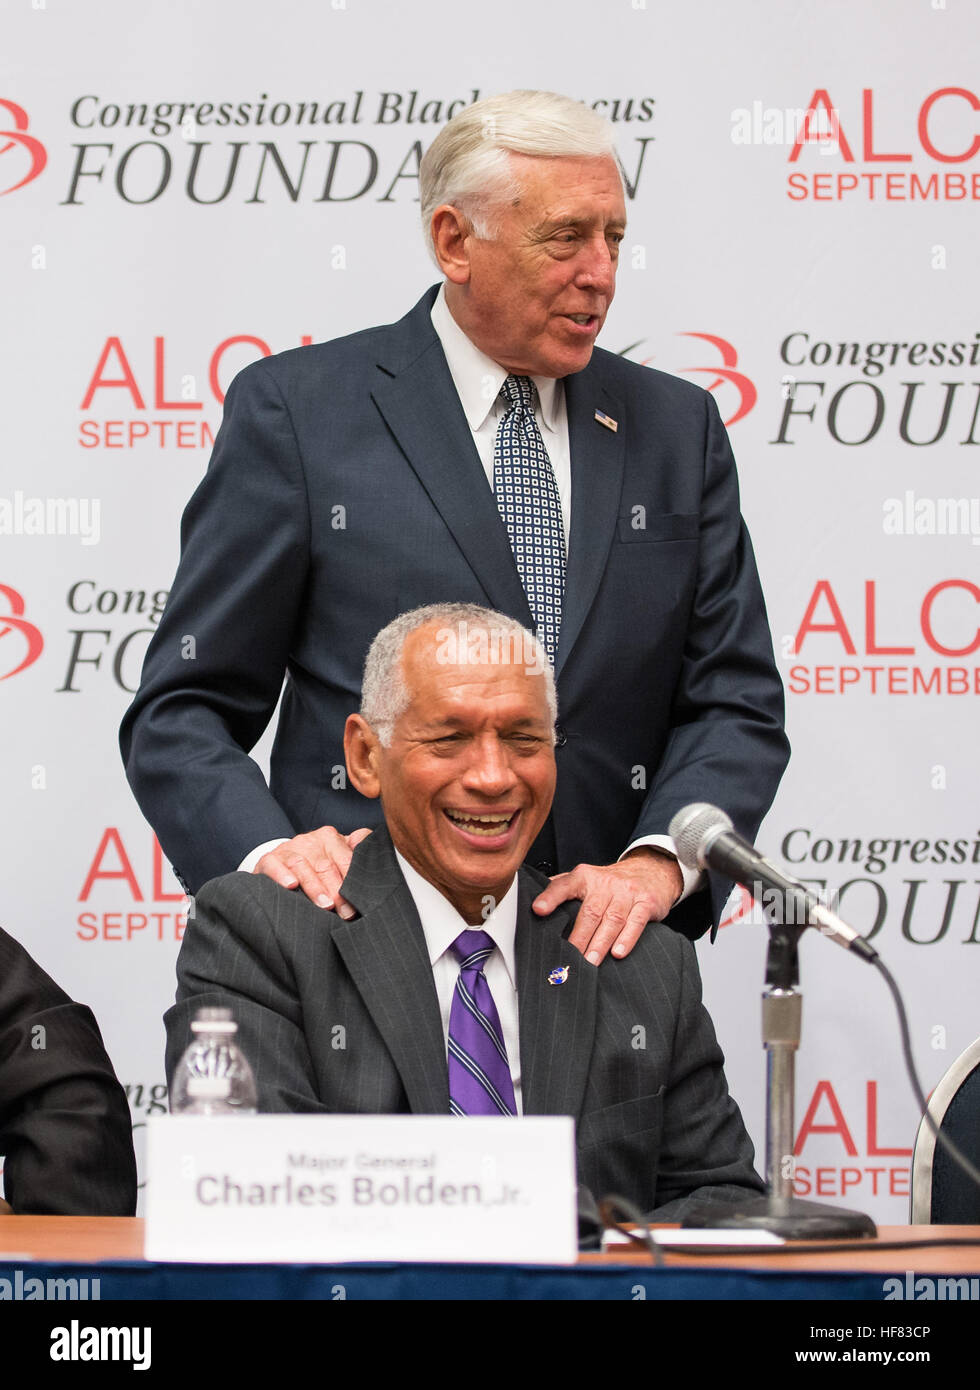 Representative Steny Hoyer (D- Md.) greets NASA Administrator Charles Bolden during a panel on &quot;Women in STEM: A Gender Gap to Innovation&quot; at the Annual Legislative Congress (ALC), held by the Congressional Black Caucus, Thursday, September 15, 2016 at the Washington Convention Center in Washington. Aubrey Gemignani) Stock Photo